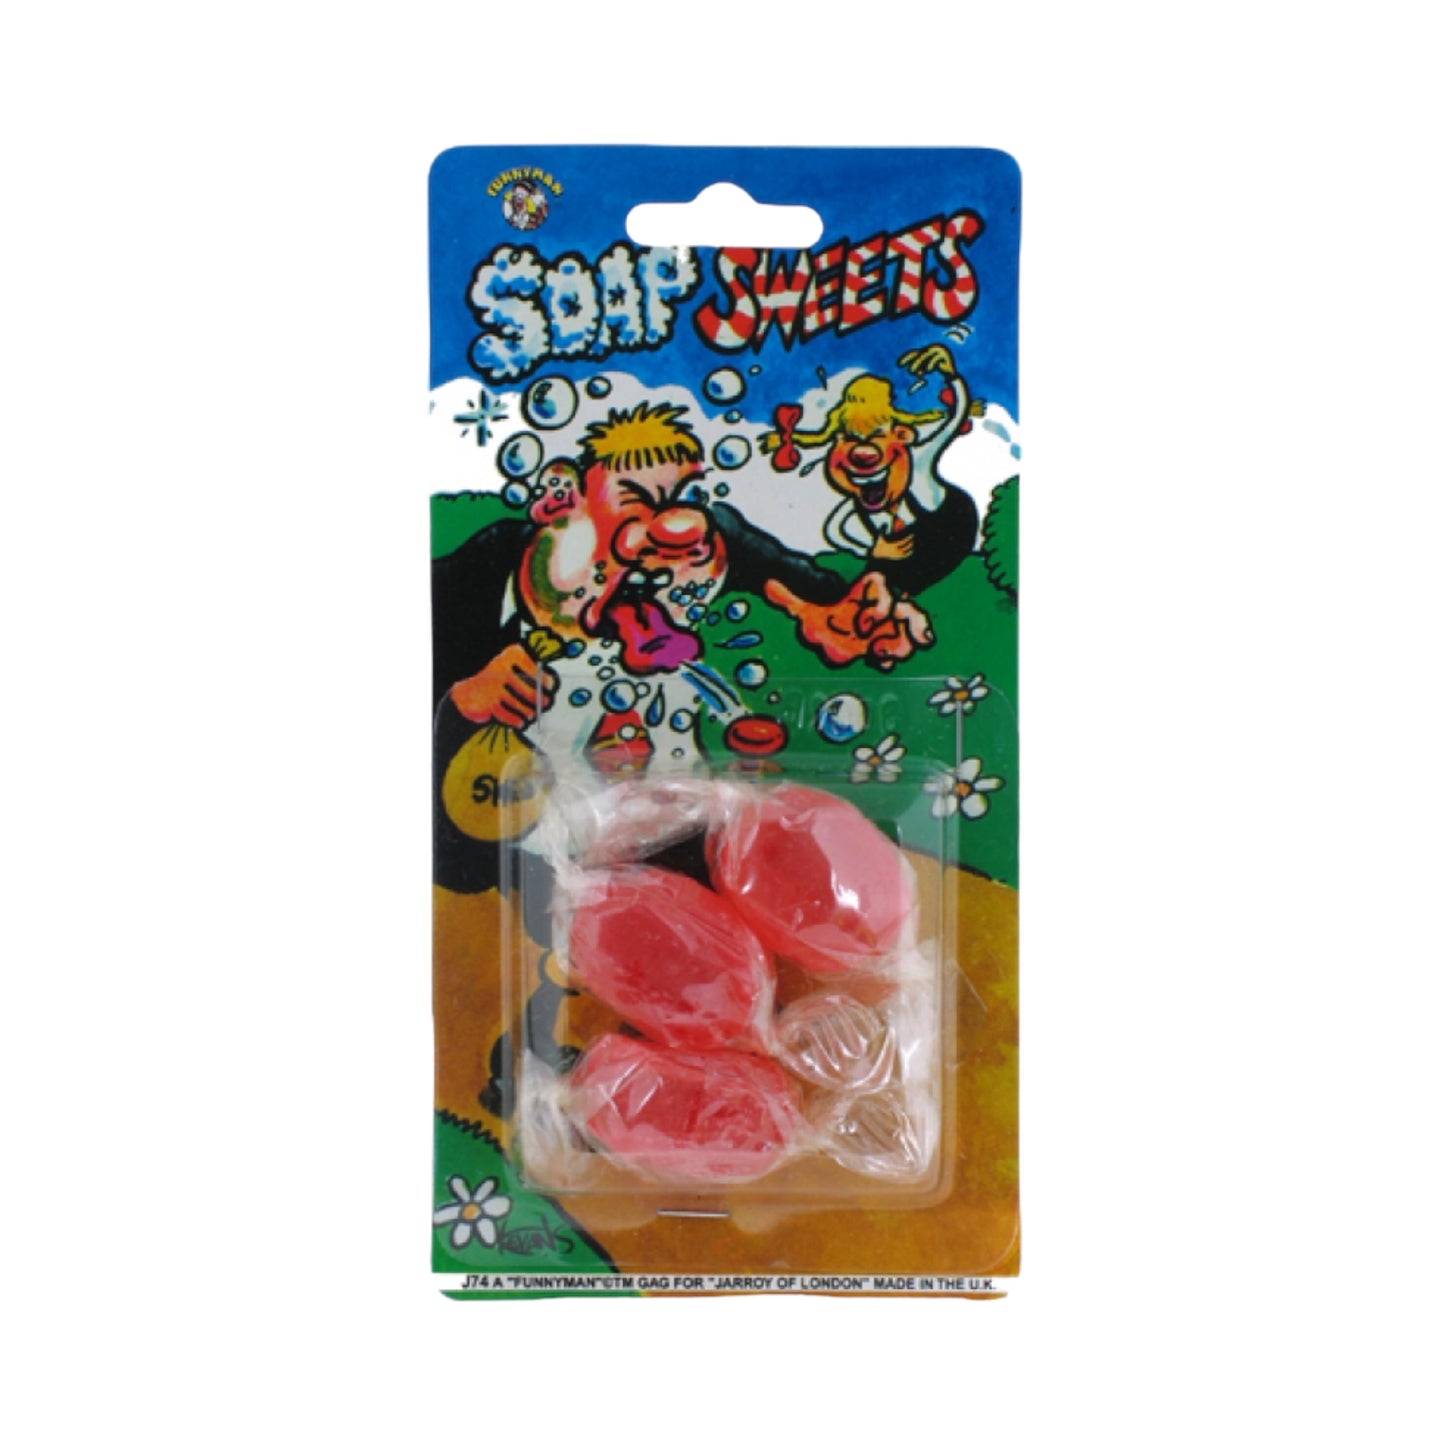 SOAP SWEETS